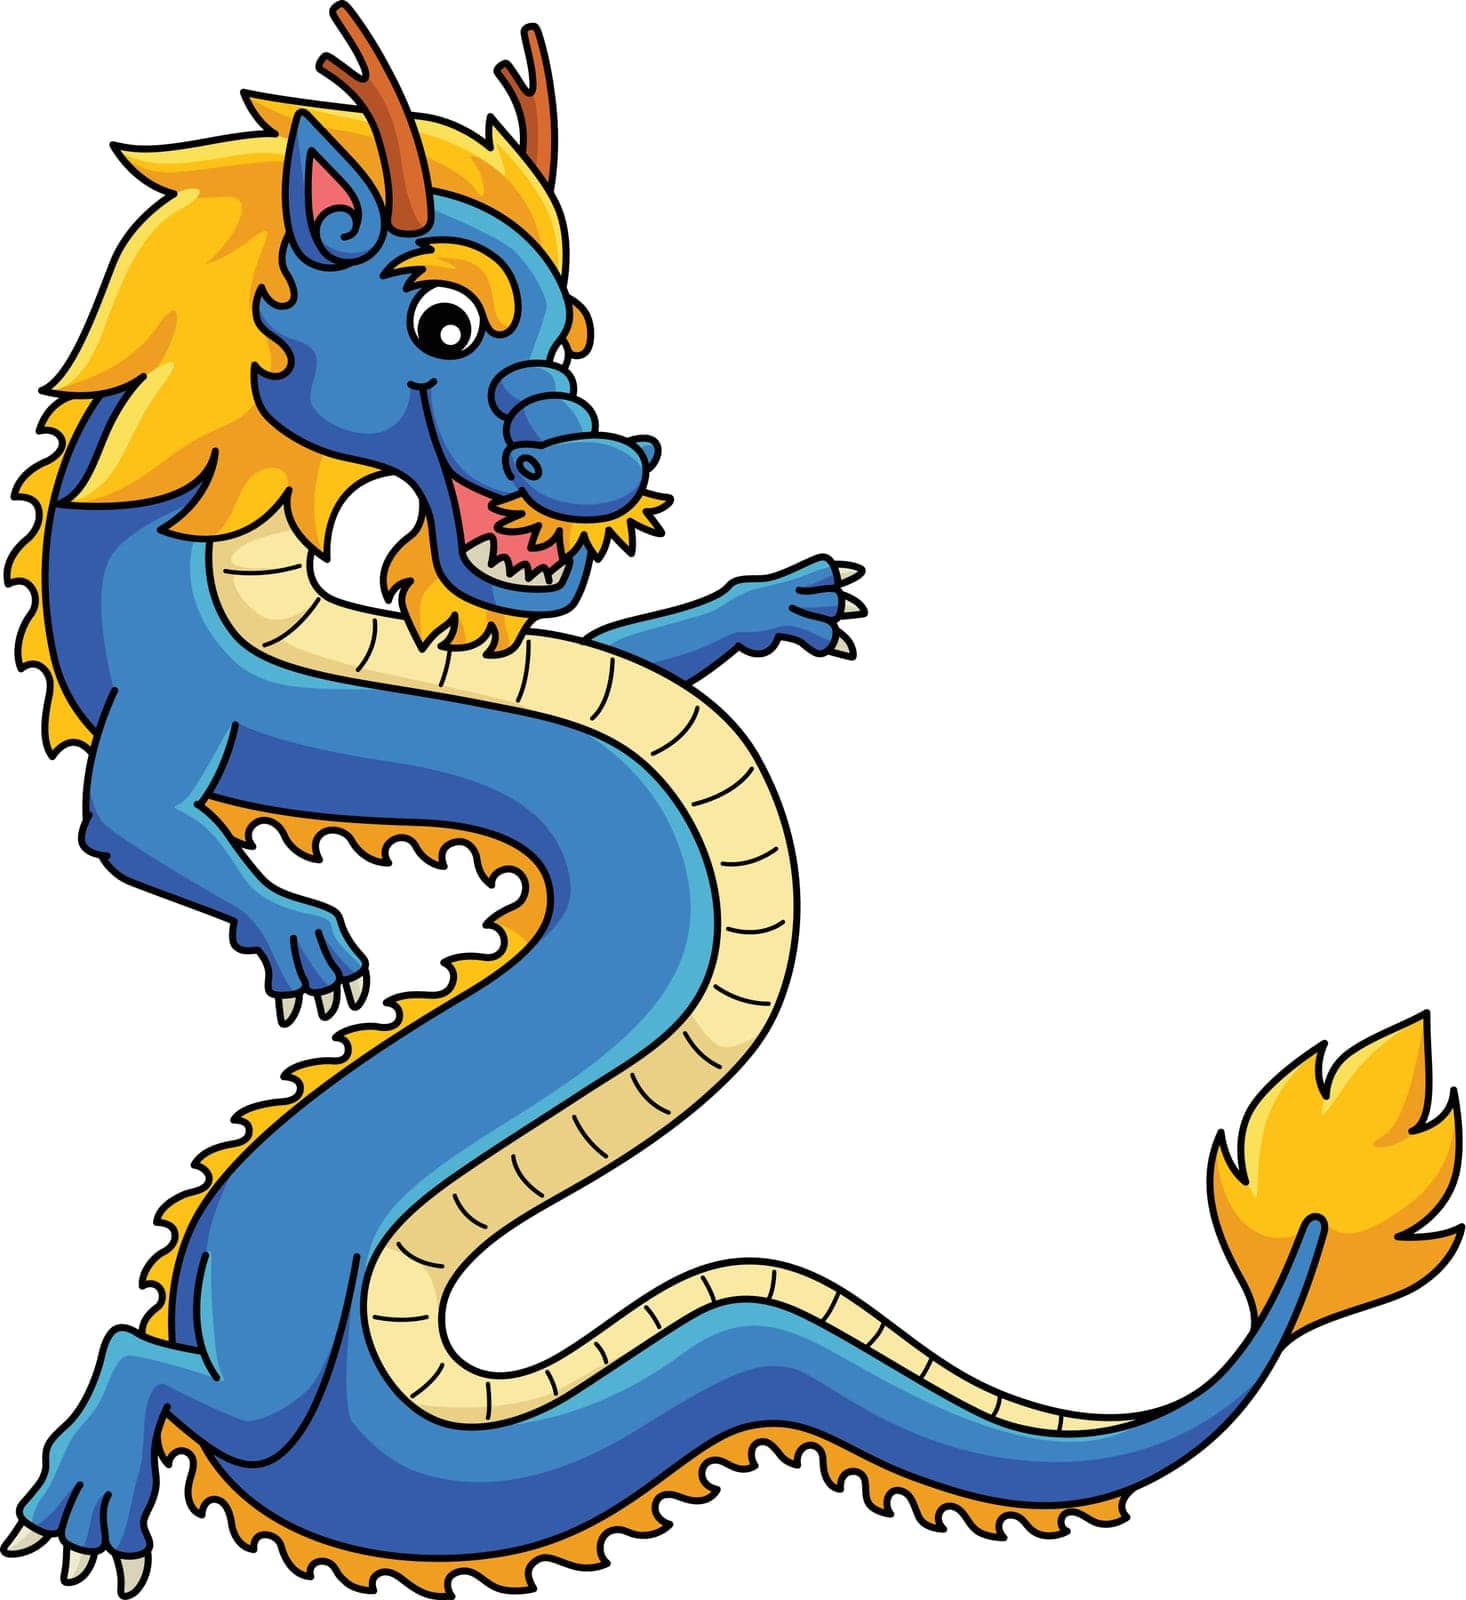 This cartoon clipart shows a Year of the Dragon Standing Dragon illustration.